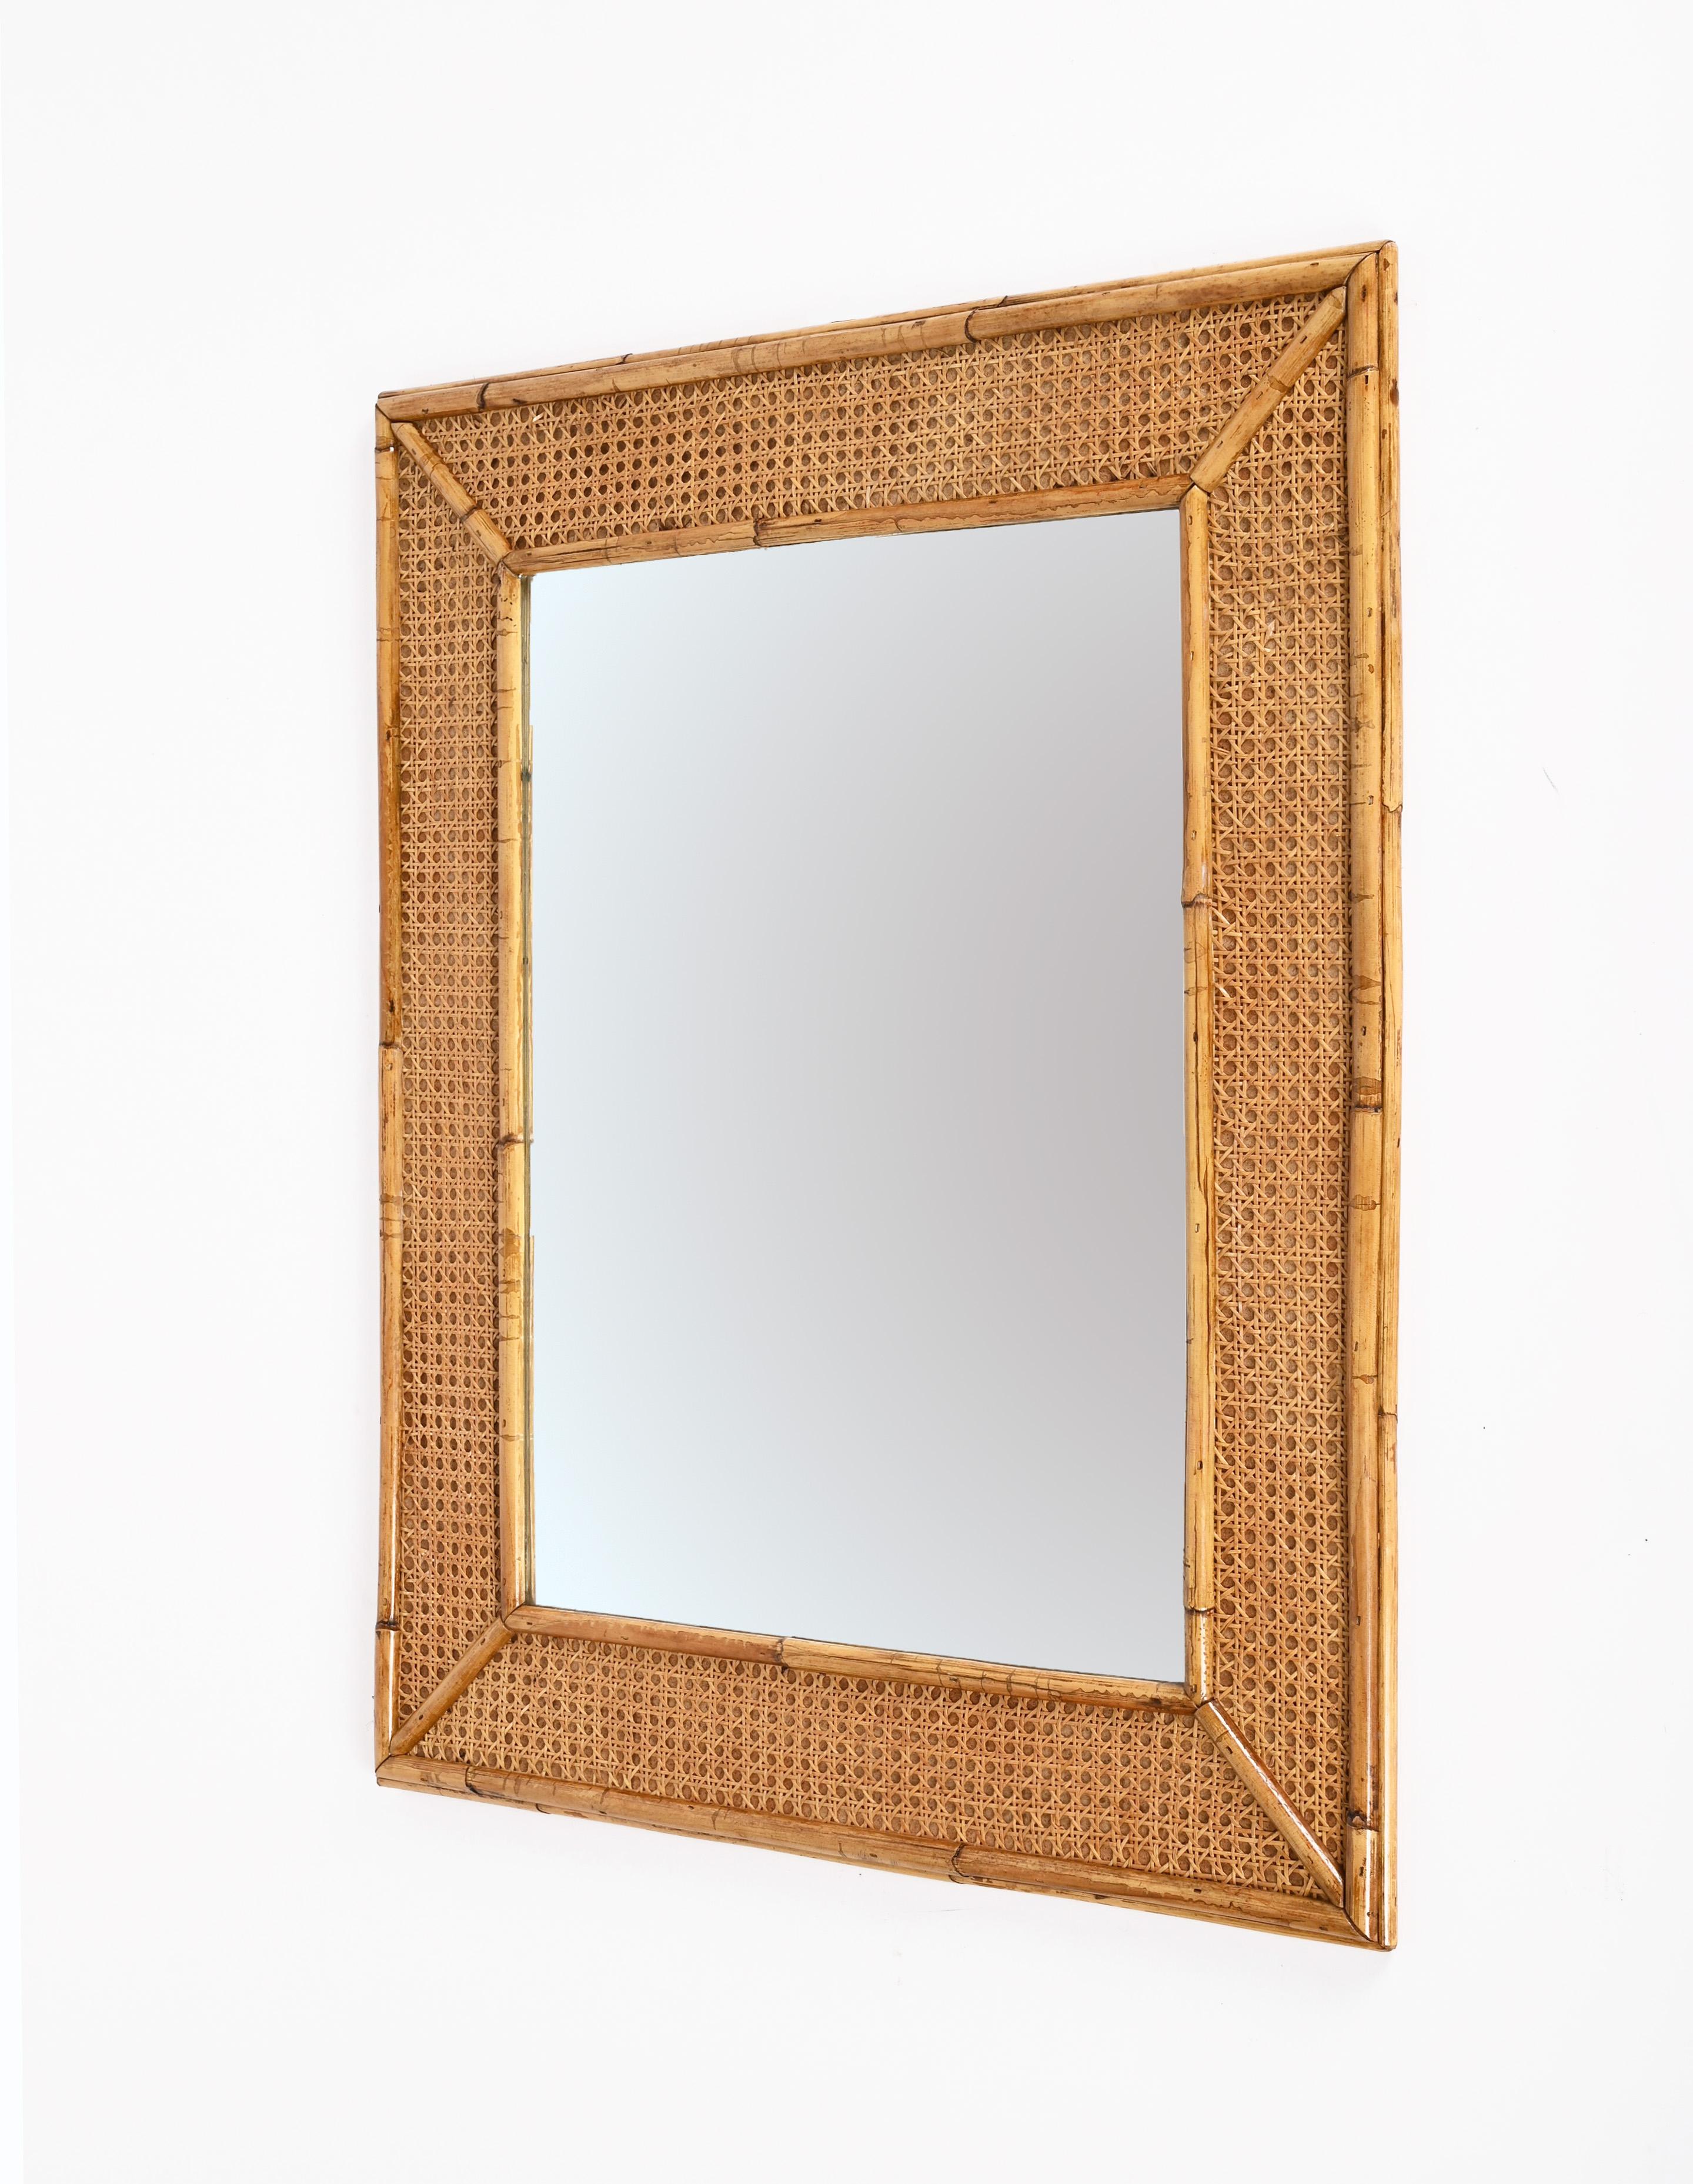 Midcentury Rectangular Italian Mirror with Bamboo and Vienna Straw Frame, 1970s For Sale 8